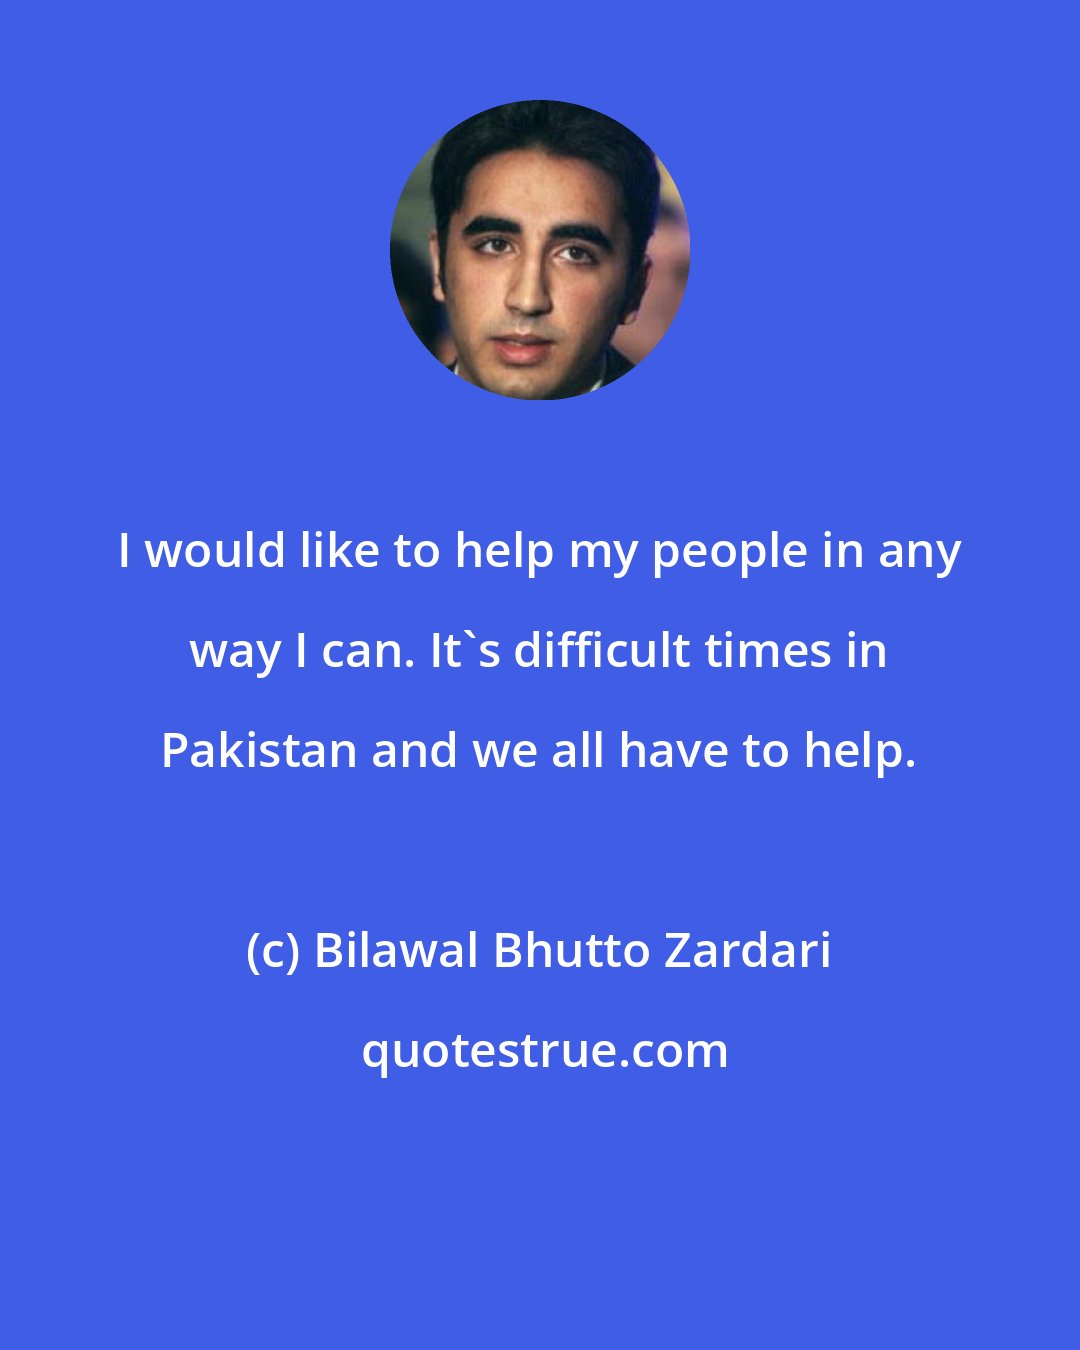 Bilawal Bhutto Zardari: I would like to help my people in any way I can. It's difficult times in Pakistan and we all have to help.